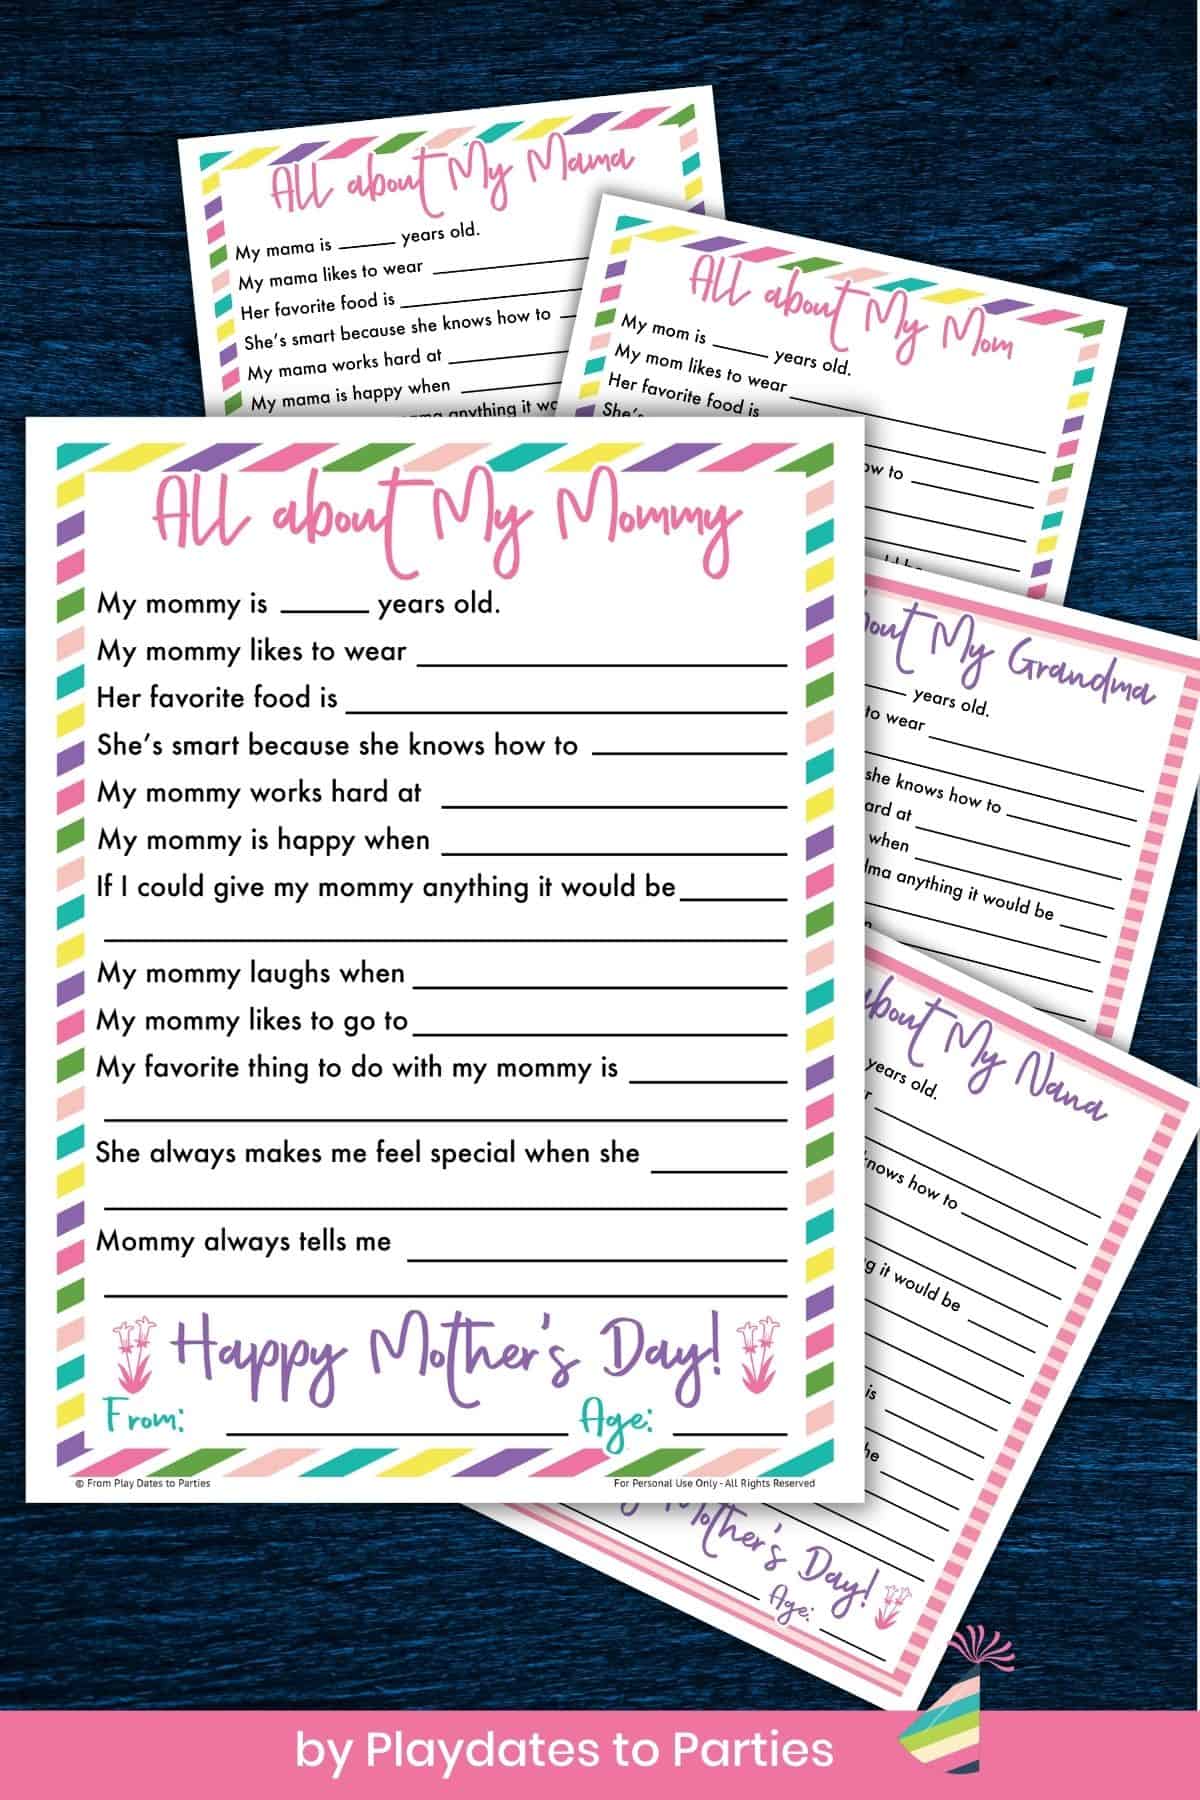 All About Mom Mother's Day Bundle with 5 different versions for grandma and mommy.